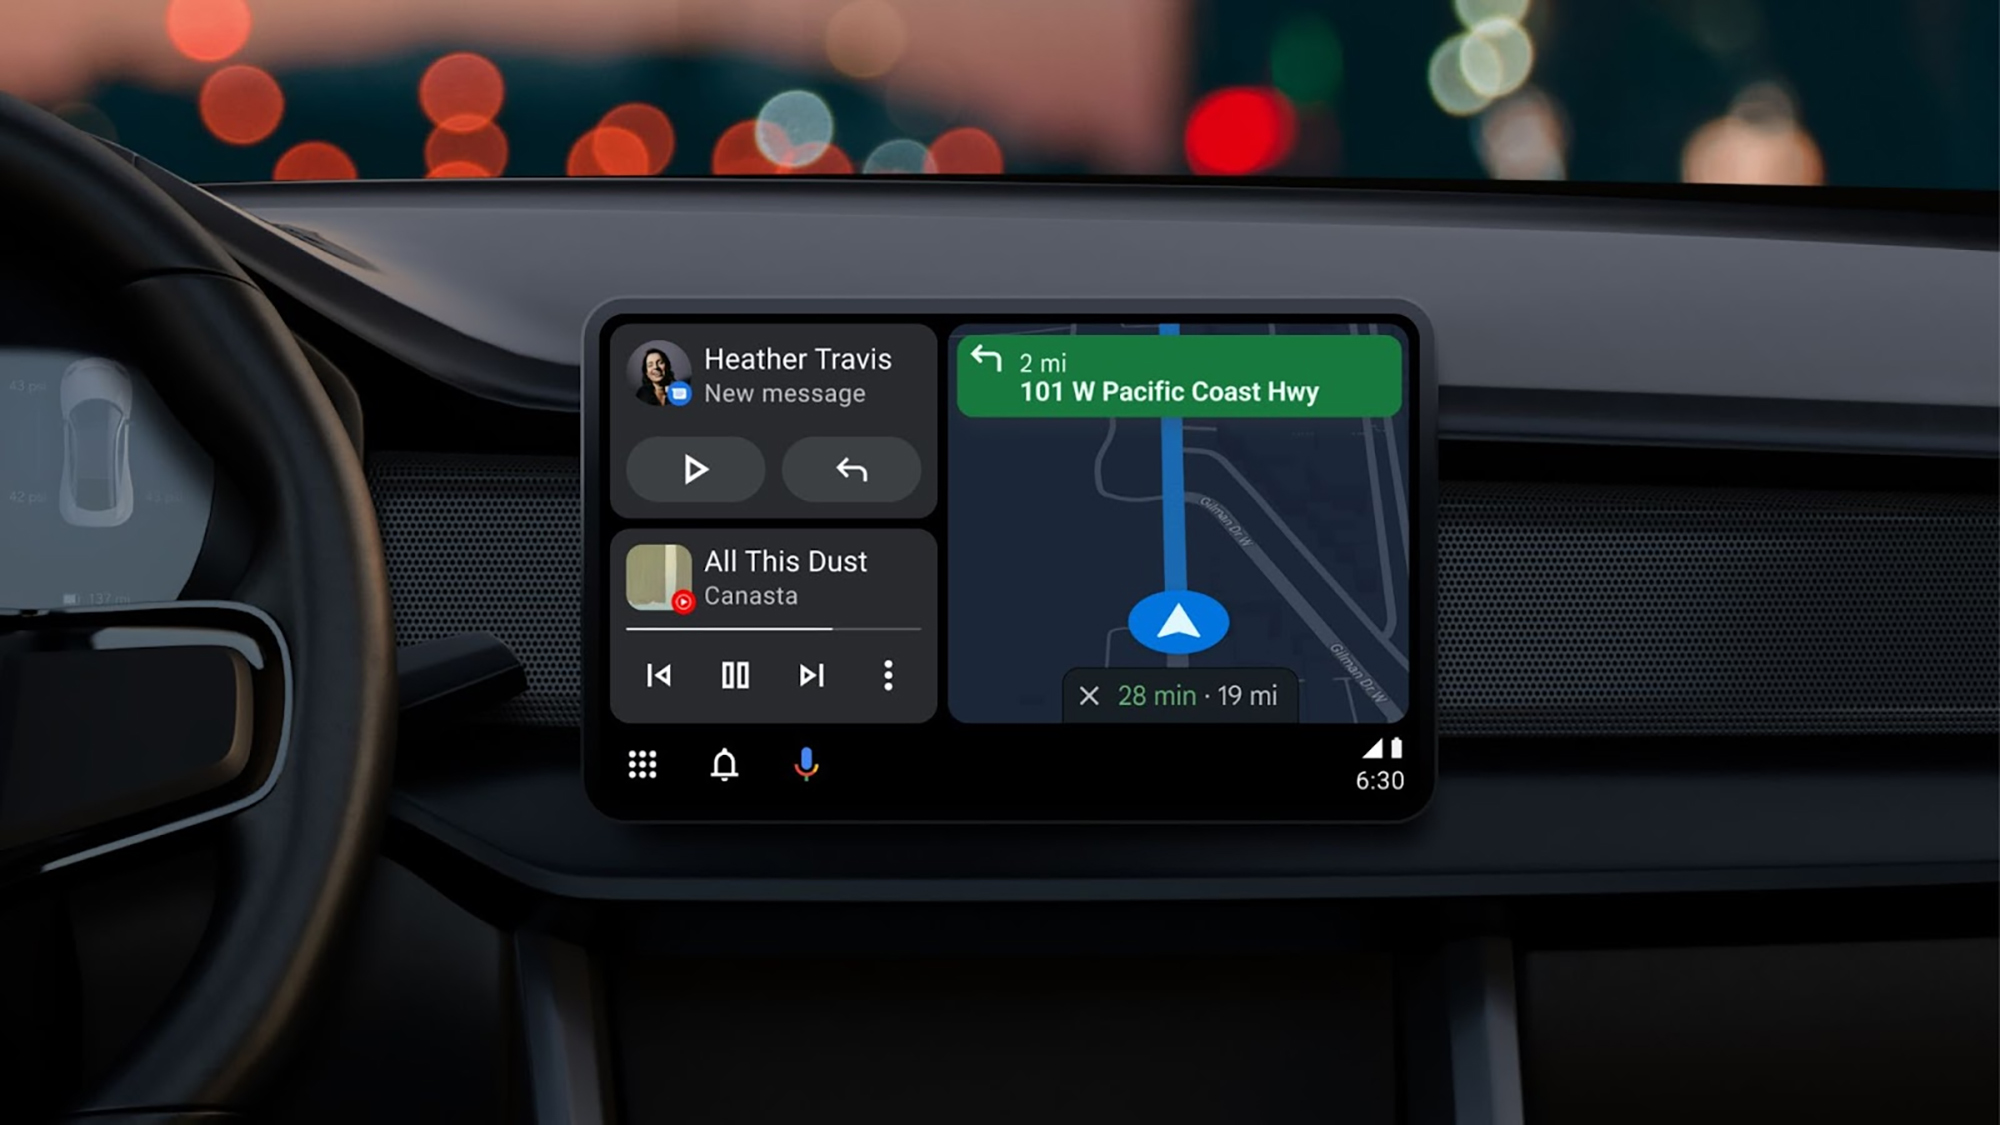 Car dashboard screen showing Android Auto's new interface with Google Maps.